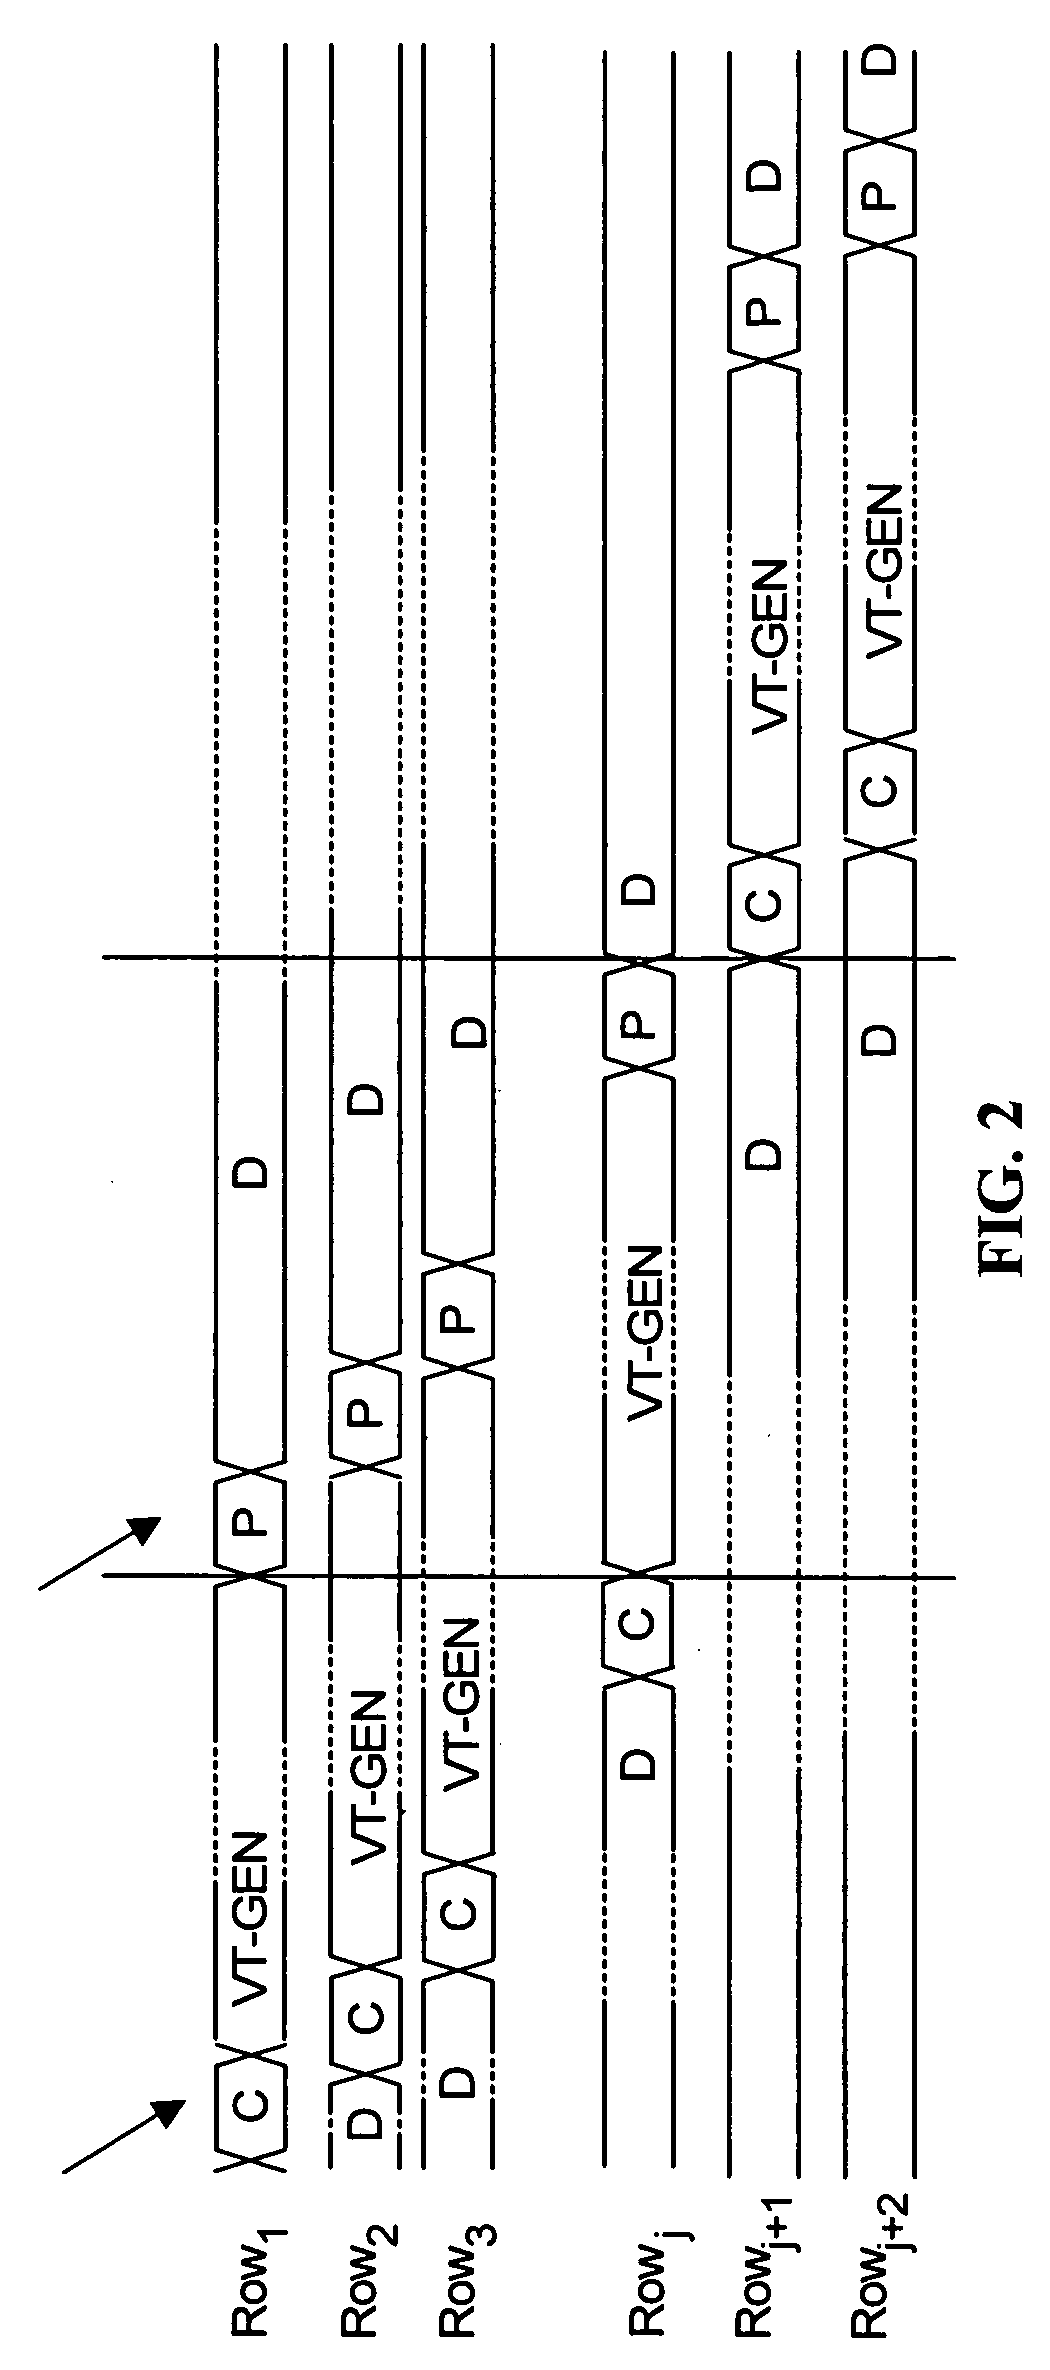 Method and system for driving a light emitting device display